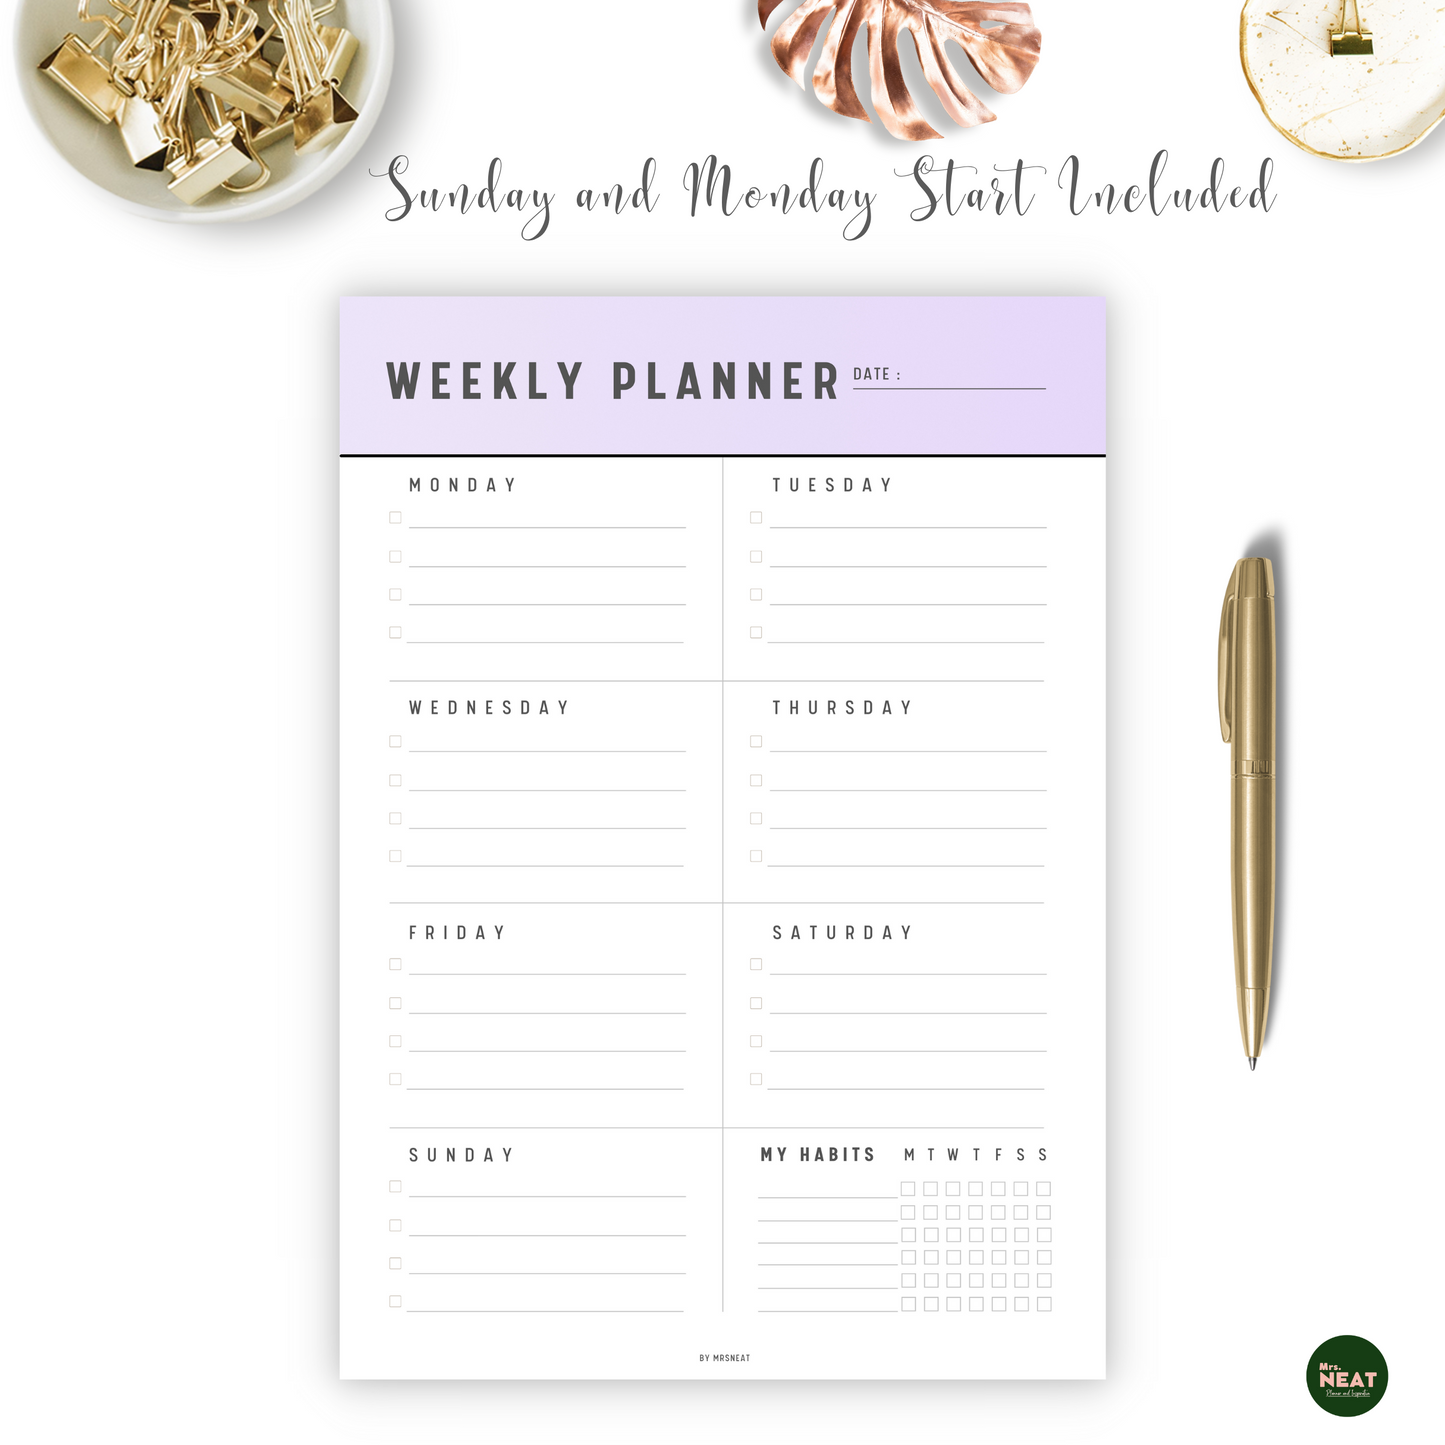 Cute Purple Weekly Planner with Monday Start and room for Daily Habits